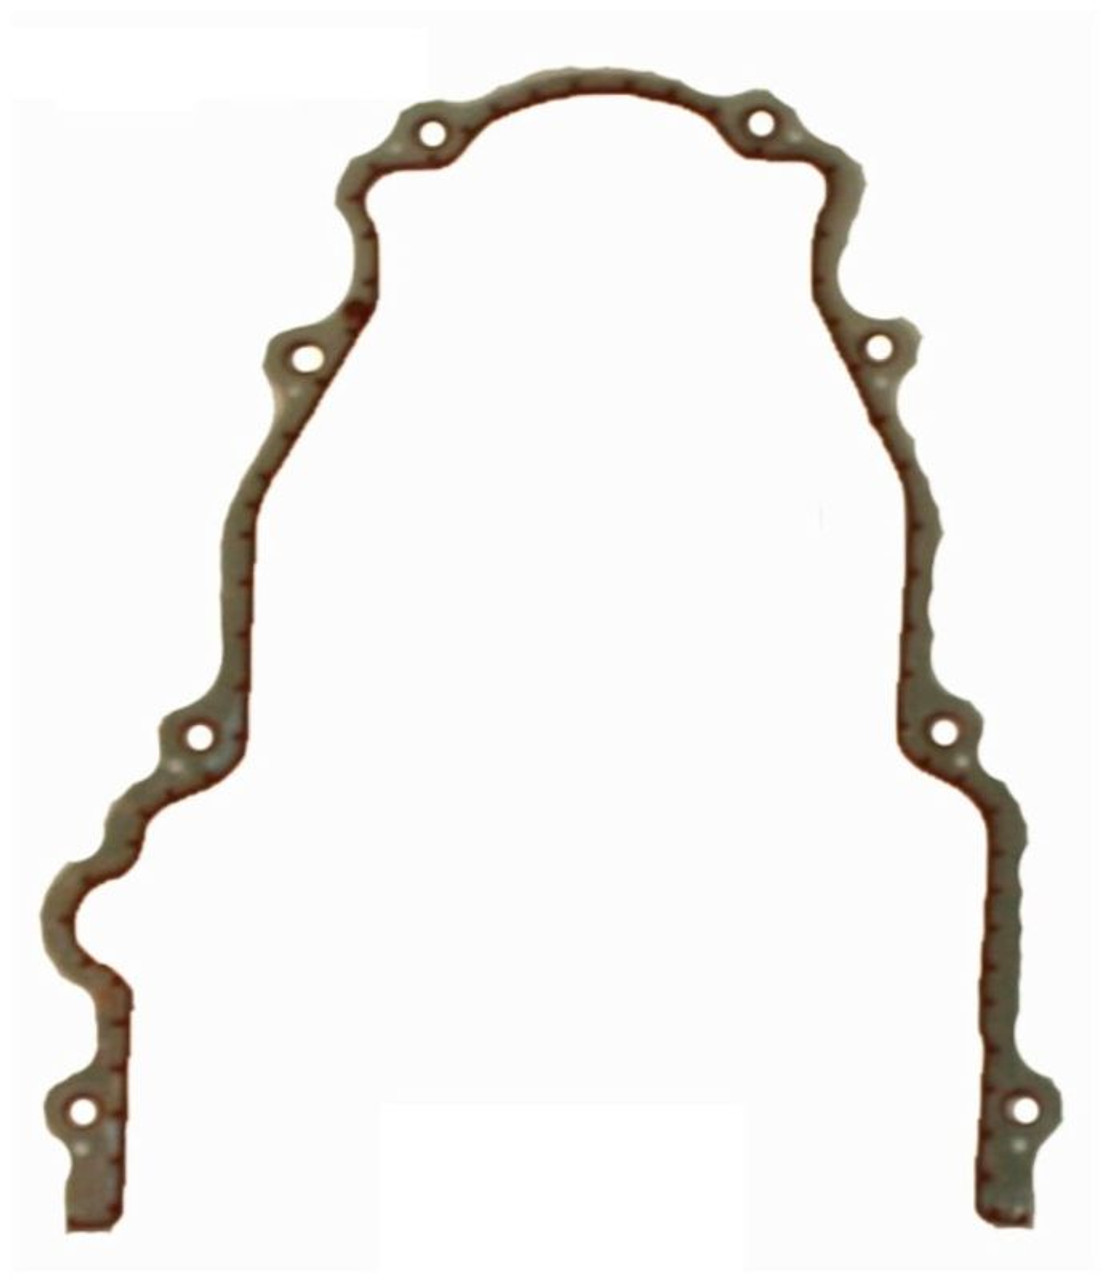 2015 Chevrolet Express 3500 4.8L Engine Timing Cover Gasket TCG293-A -905